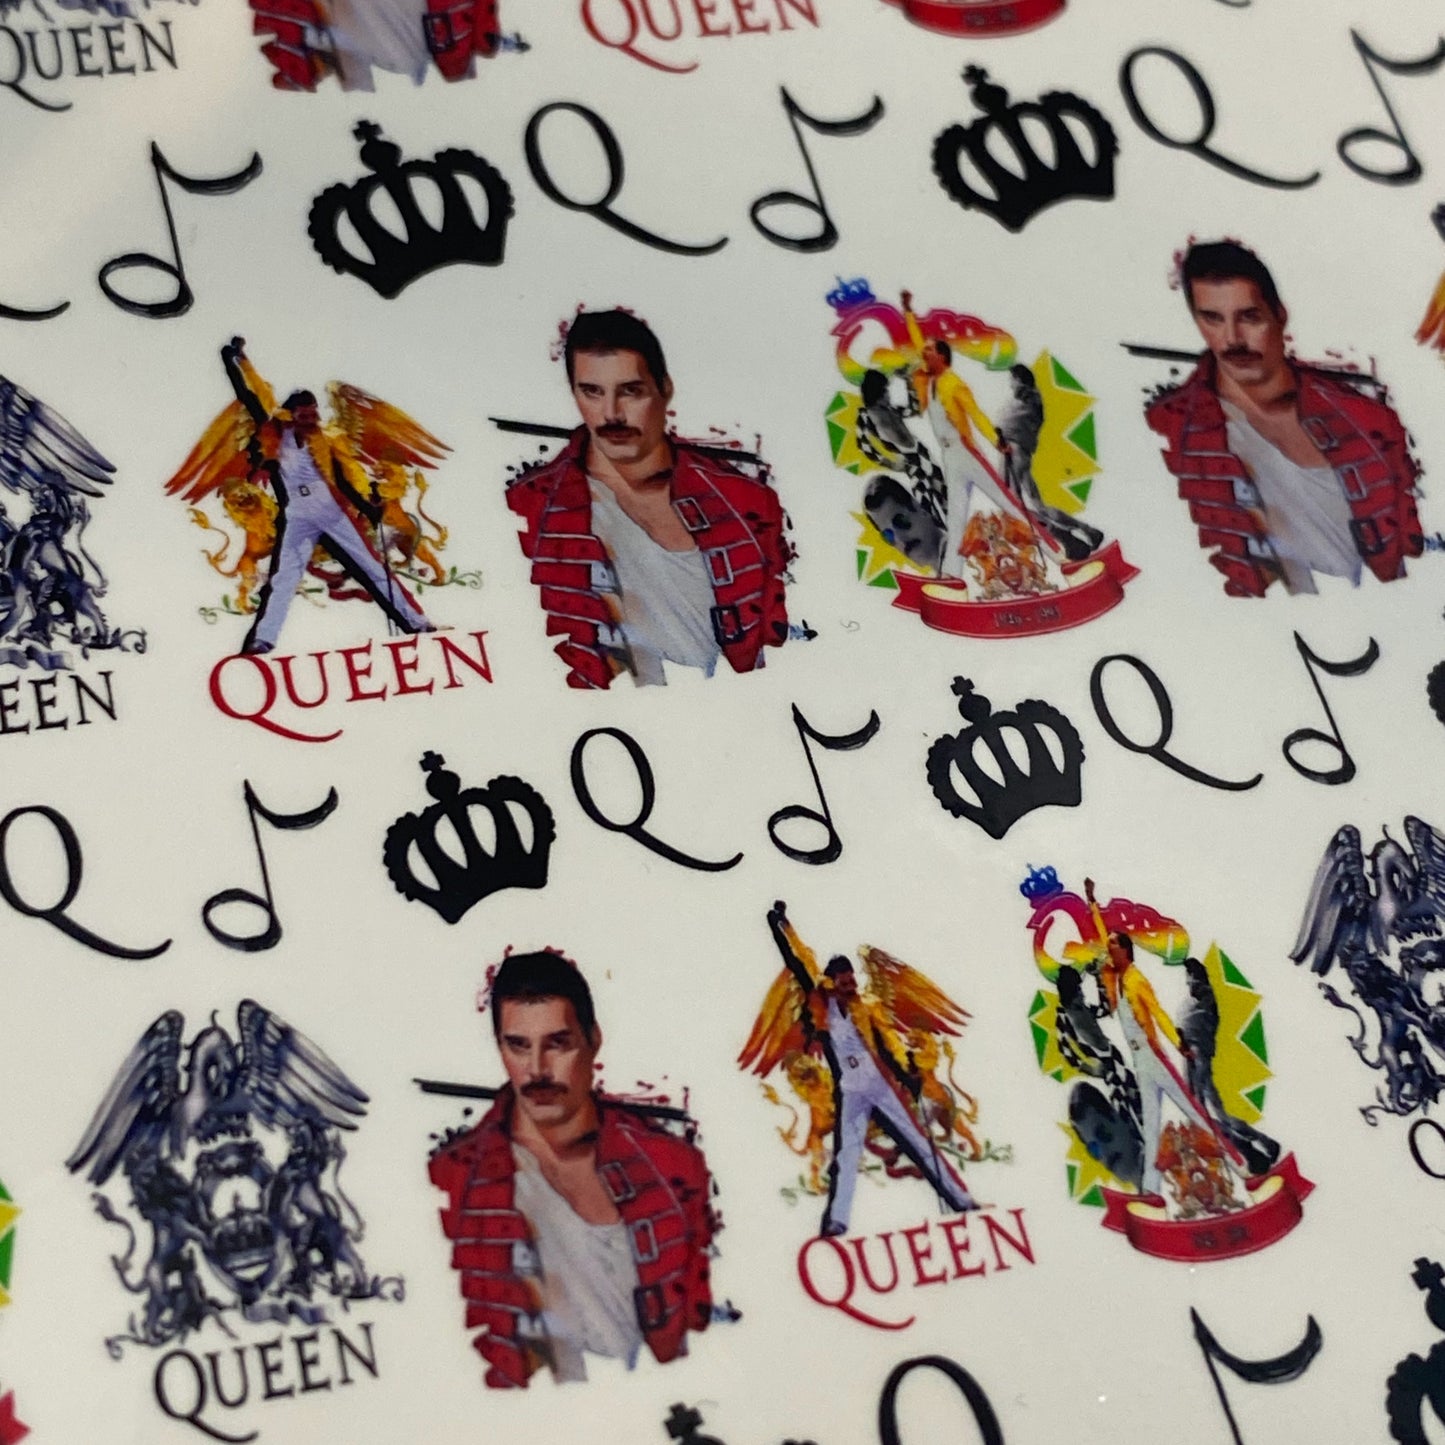 Queen Nail Art - We Will Rock You!